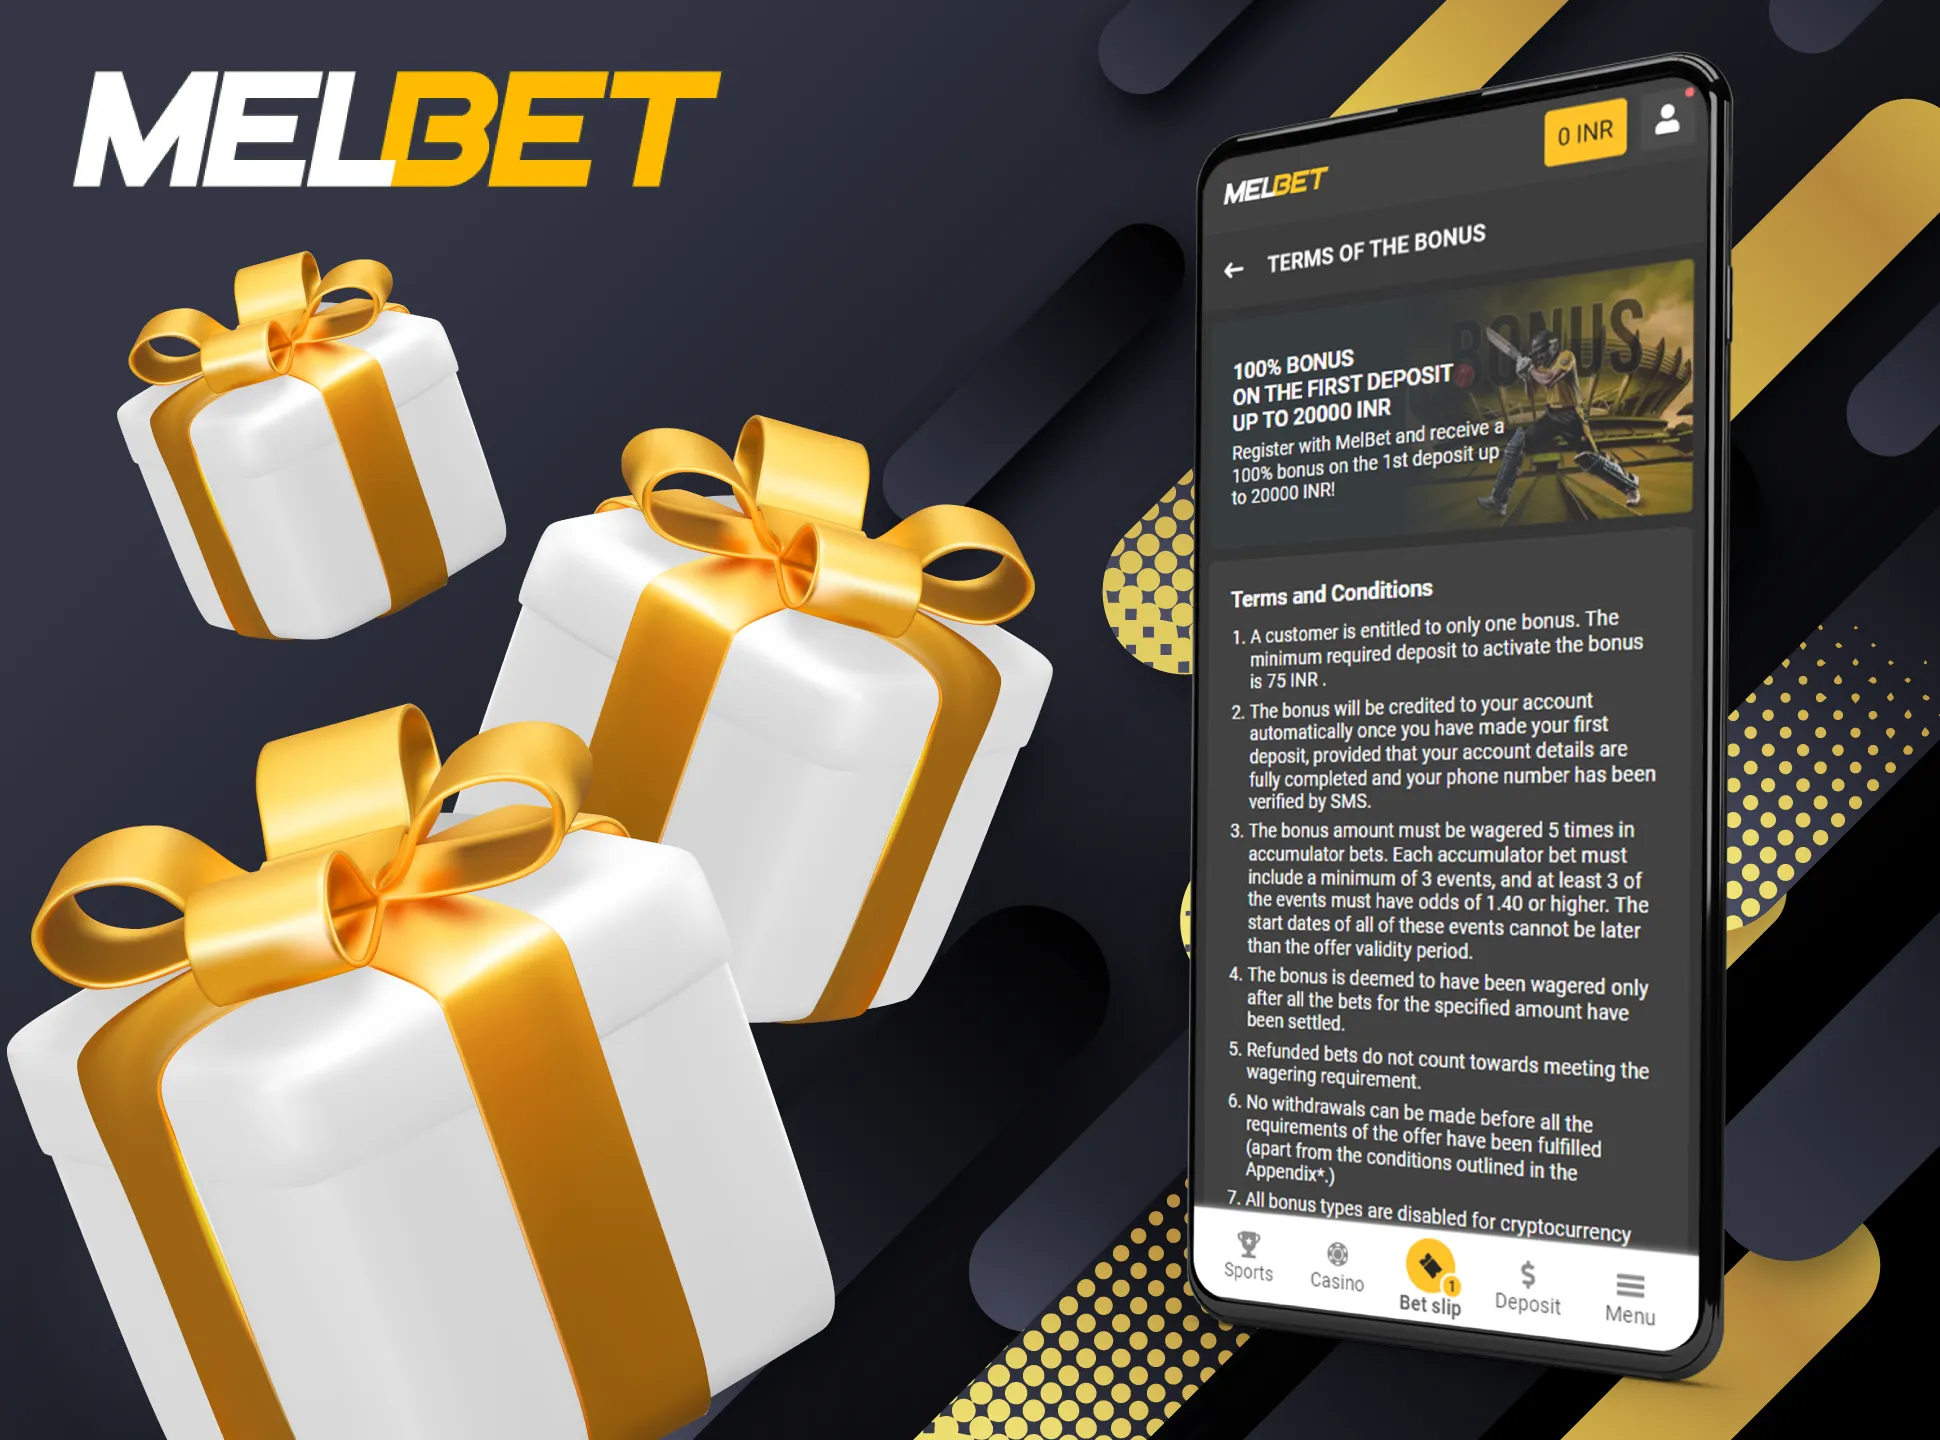 Follow the wagering rules to get profit from the Melbet bonus.